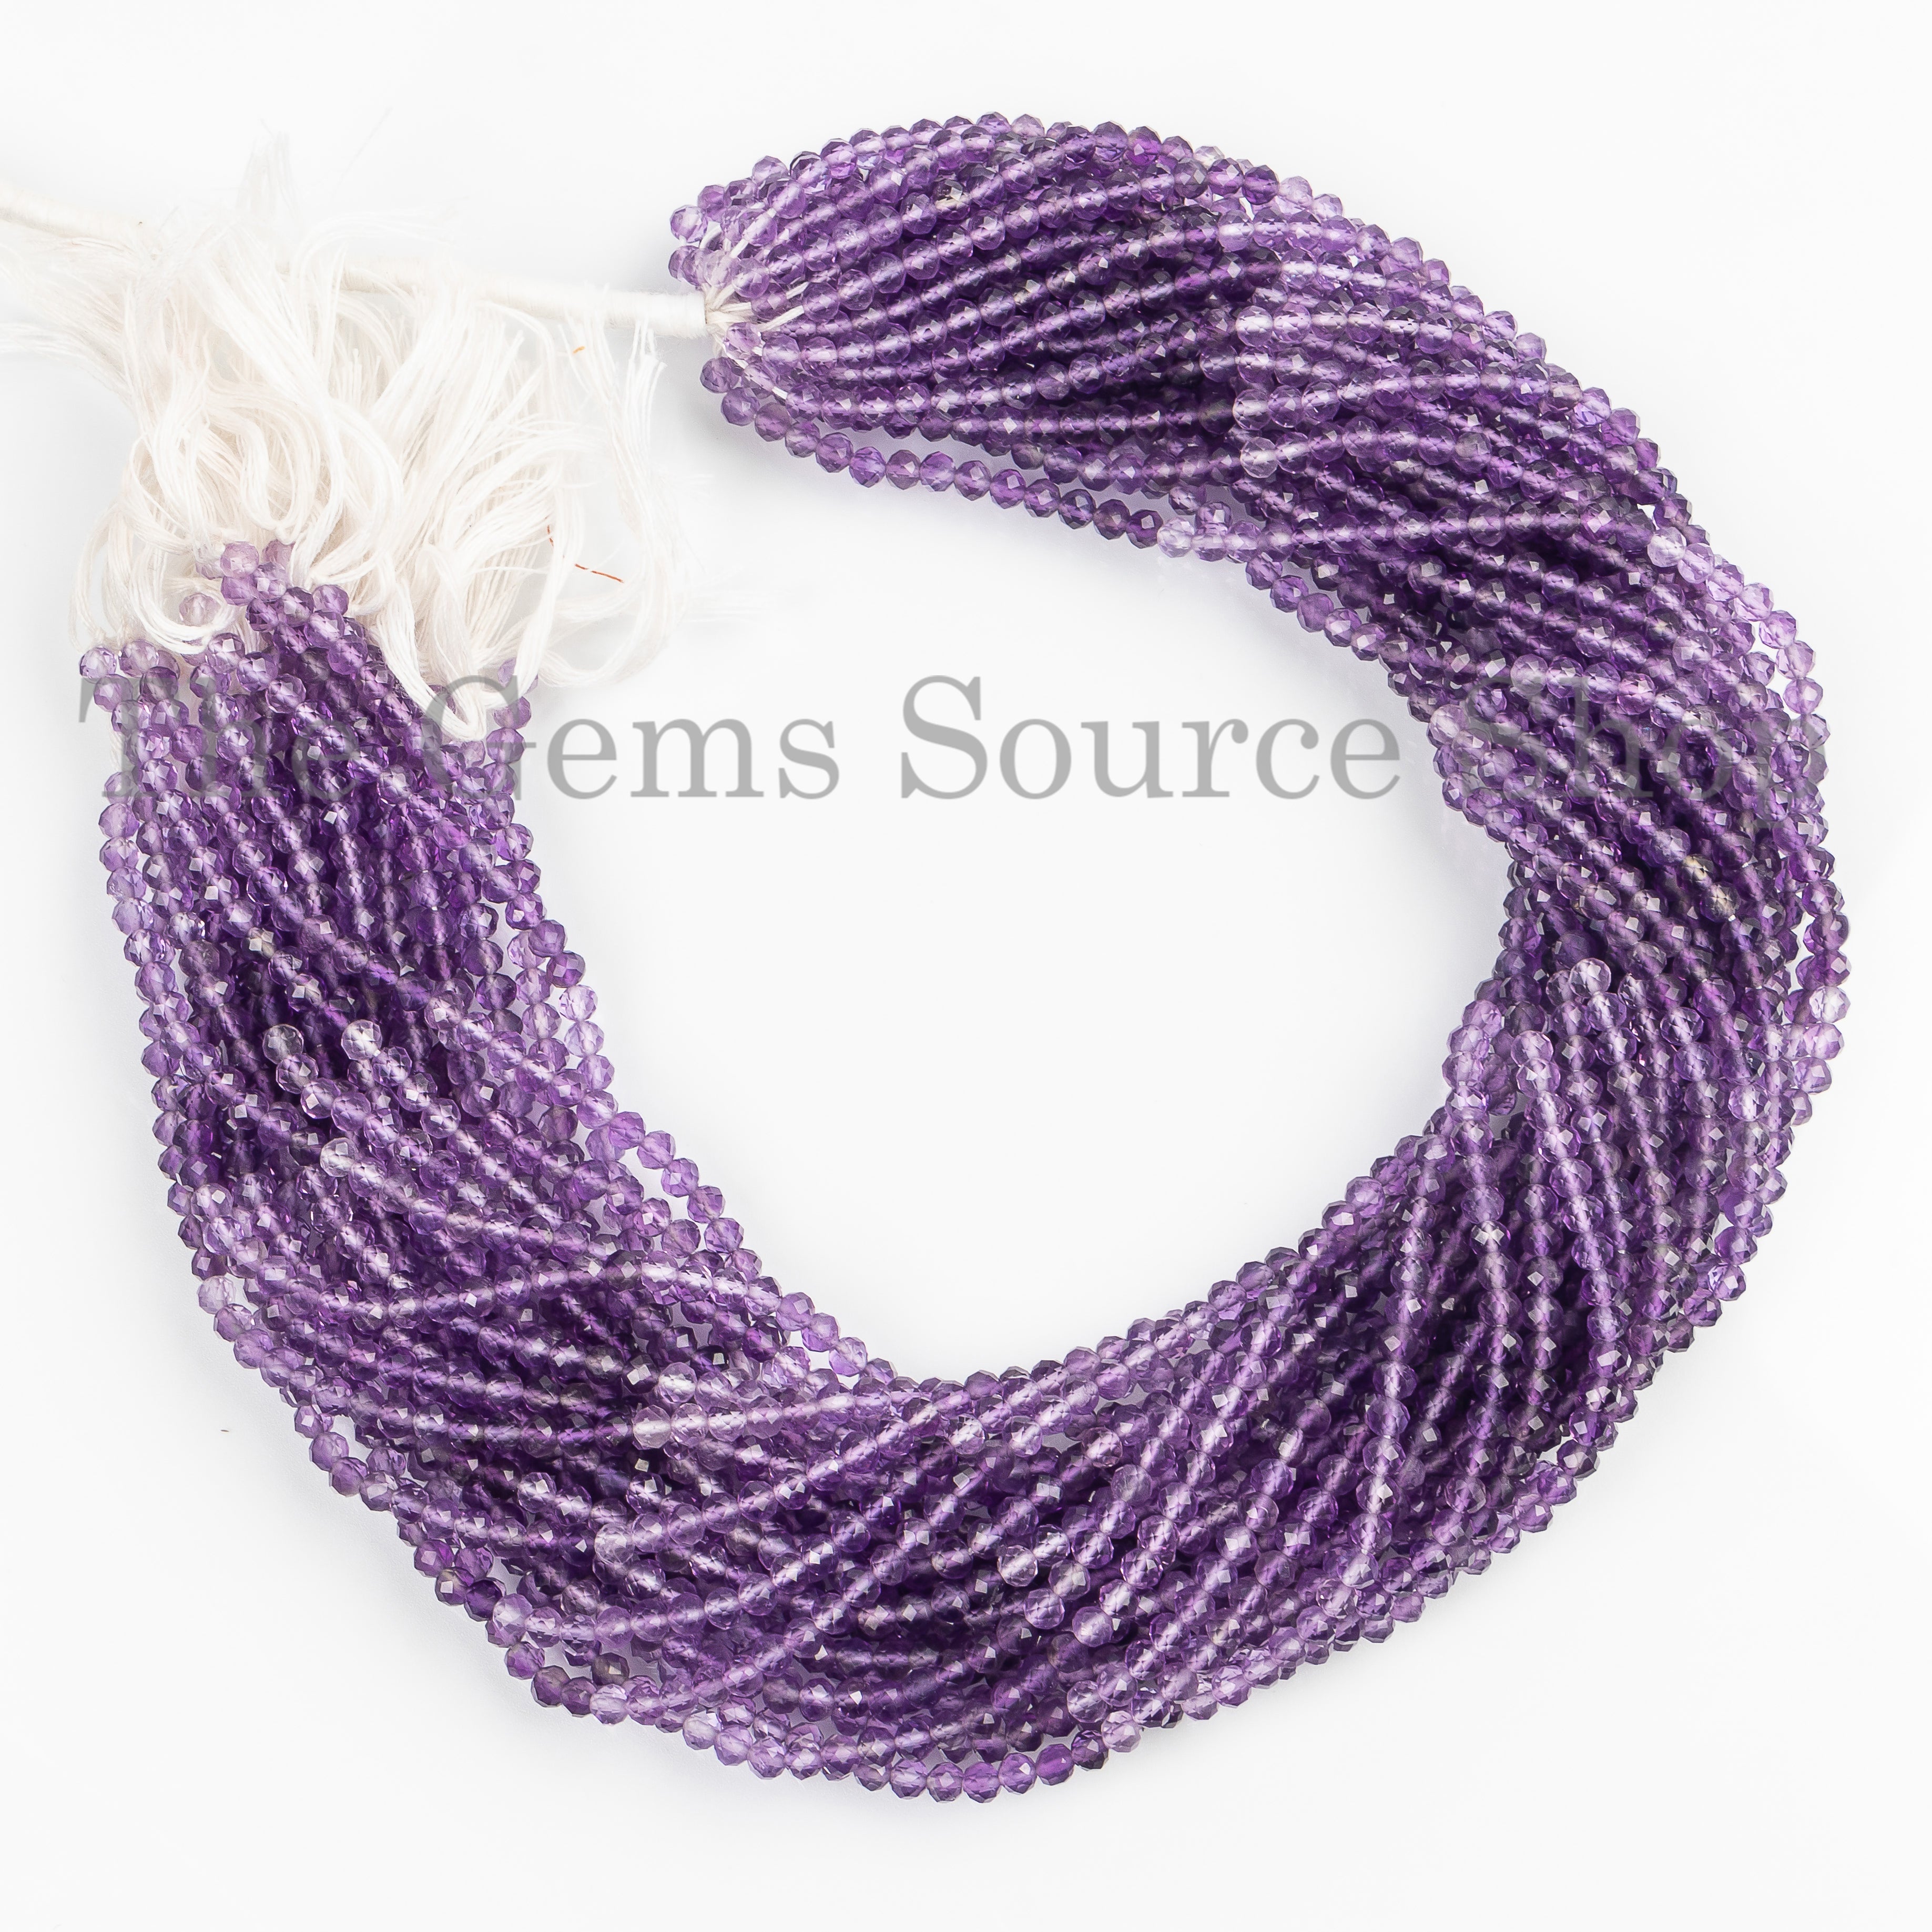 Shaded Amethyst Gemstone, shaded Amethyst faceted rondelle beads, jewelry craft beads, manufacture of stone, beaded Jewelry